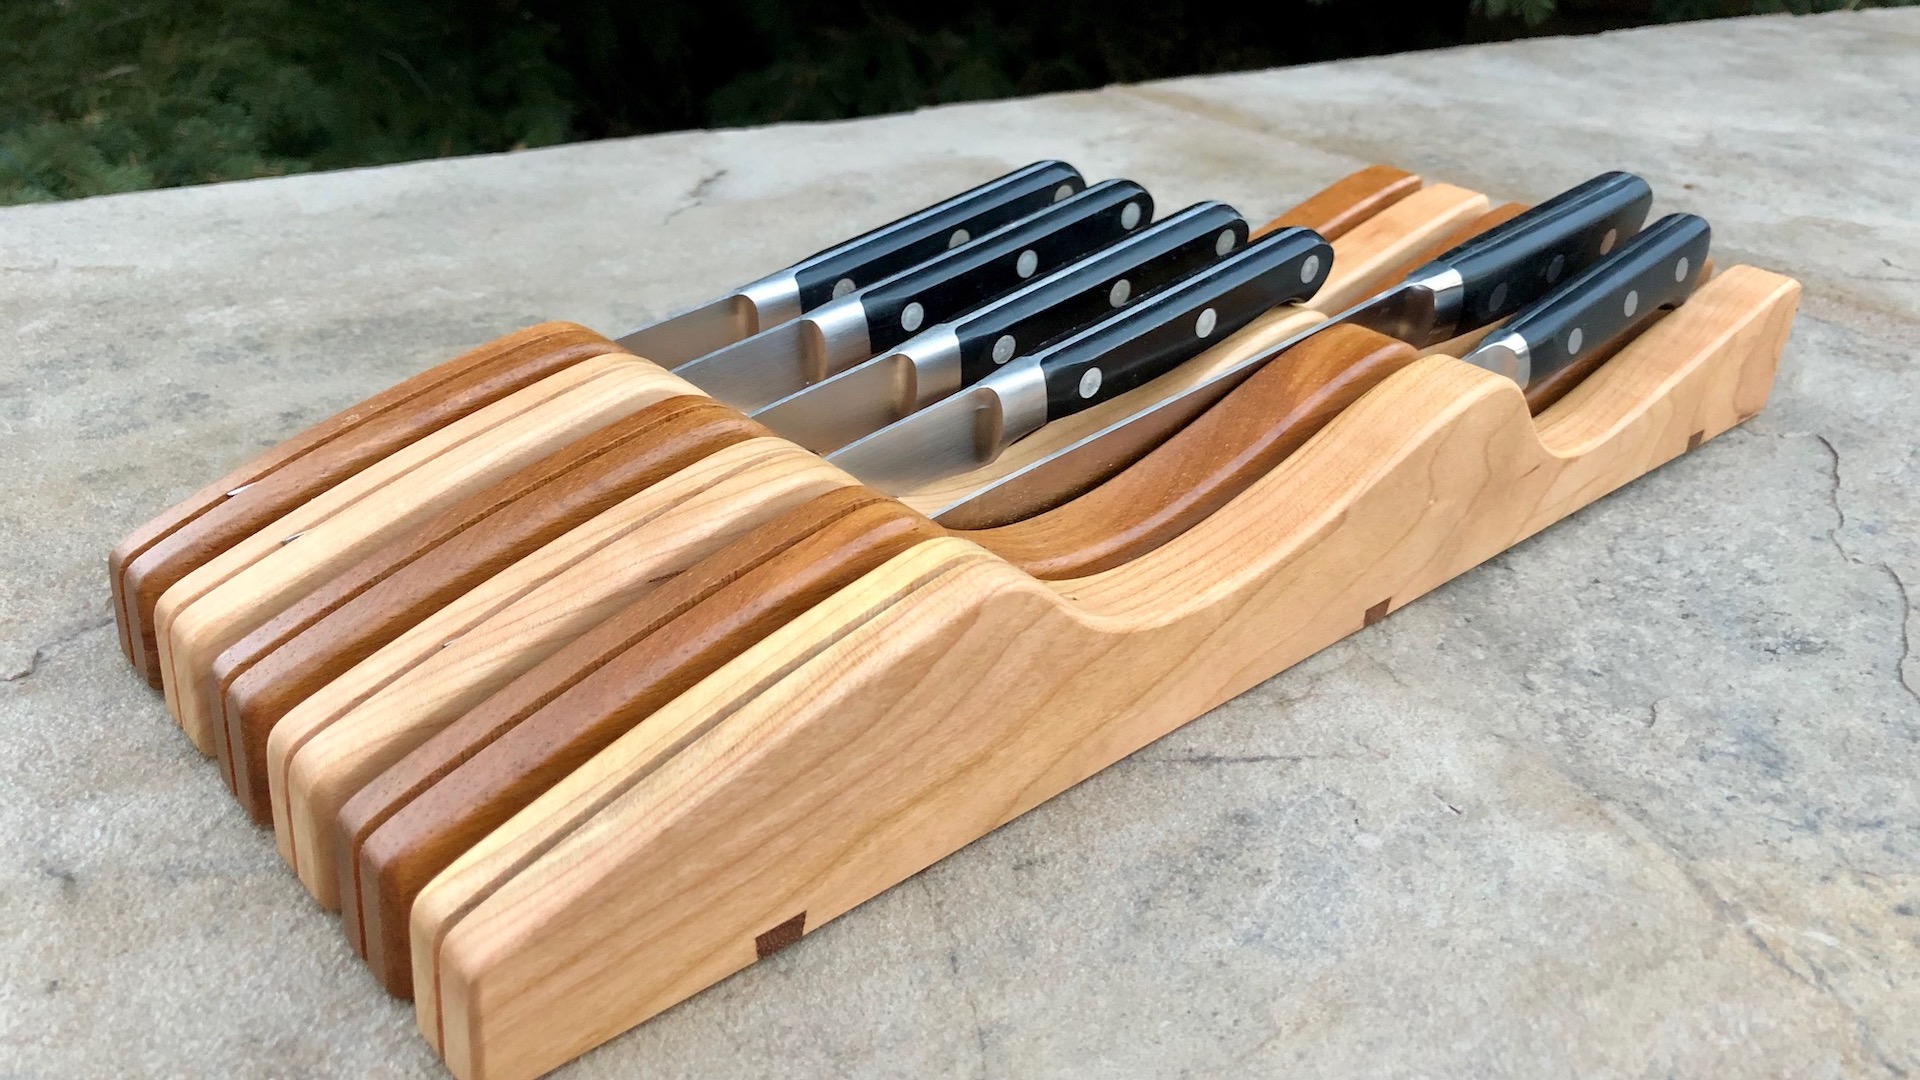 Woodworking knife drawer